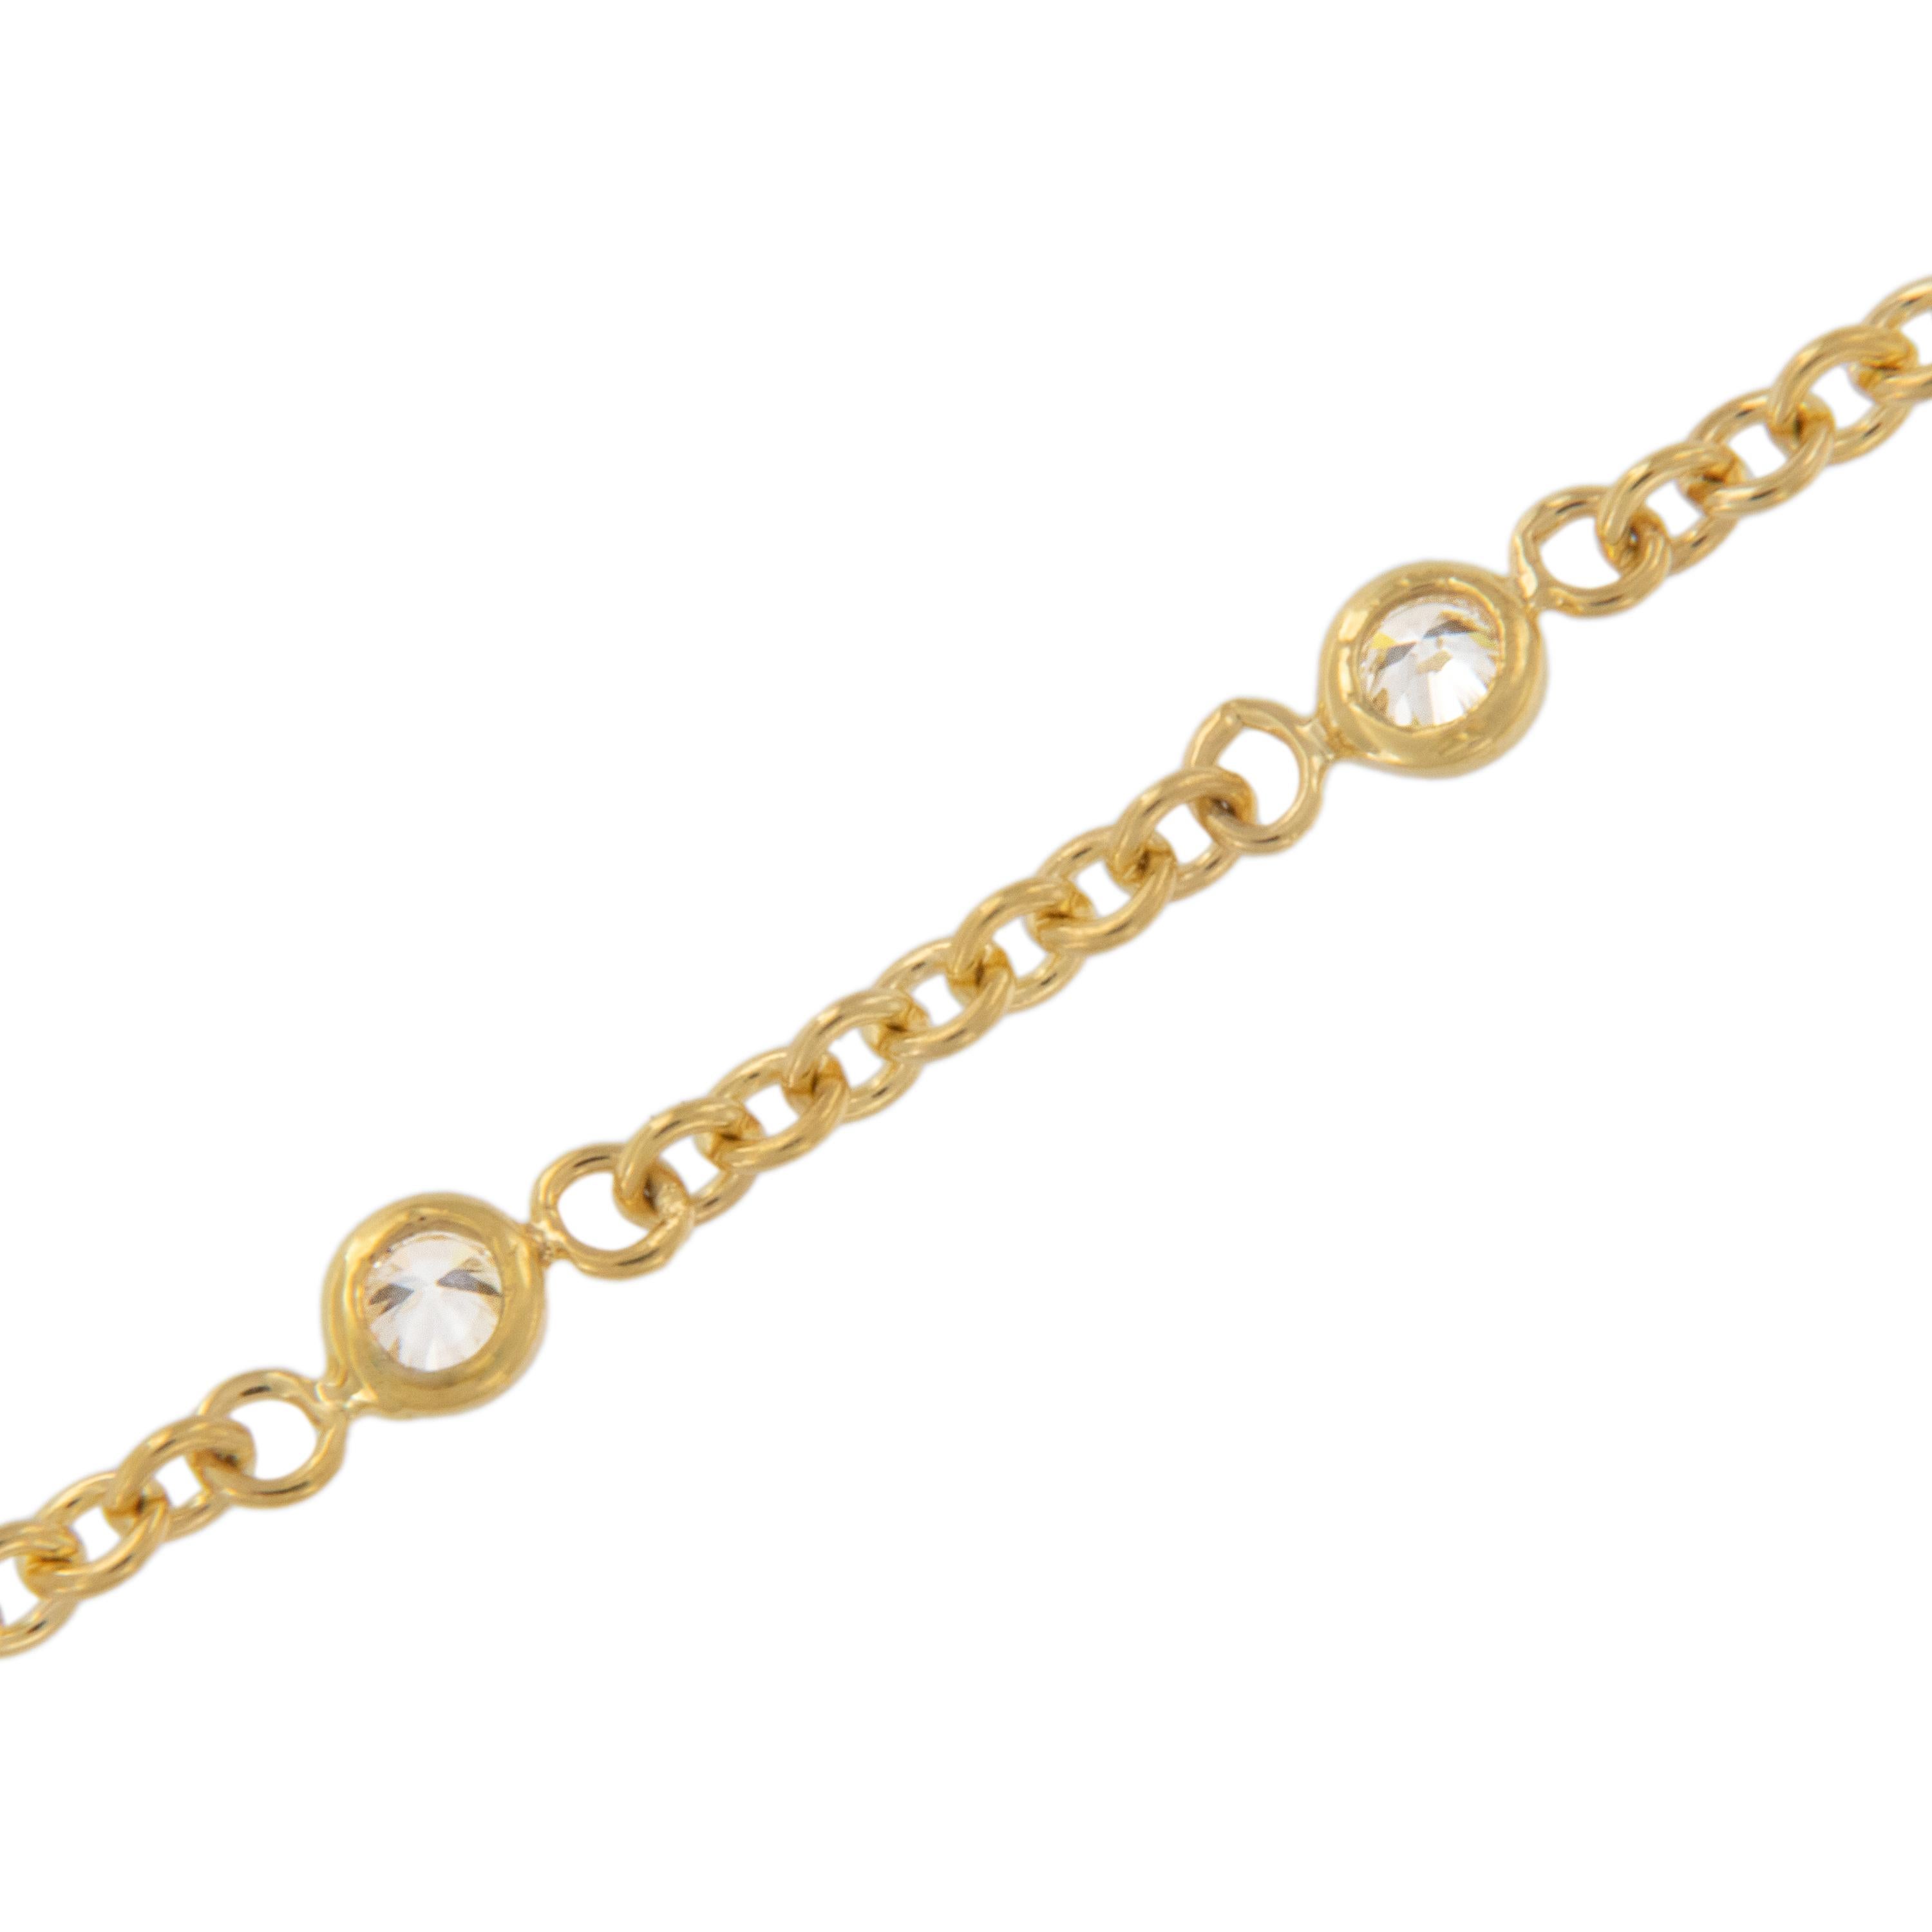 This perfect everyday bracelet contains 1/4 Cttw of fine natural diamonds bezel set at 1/2